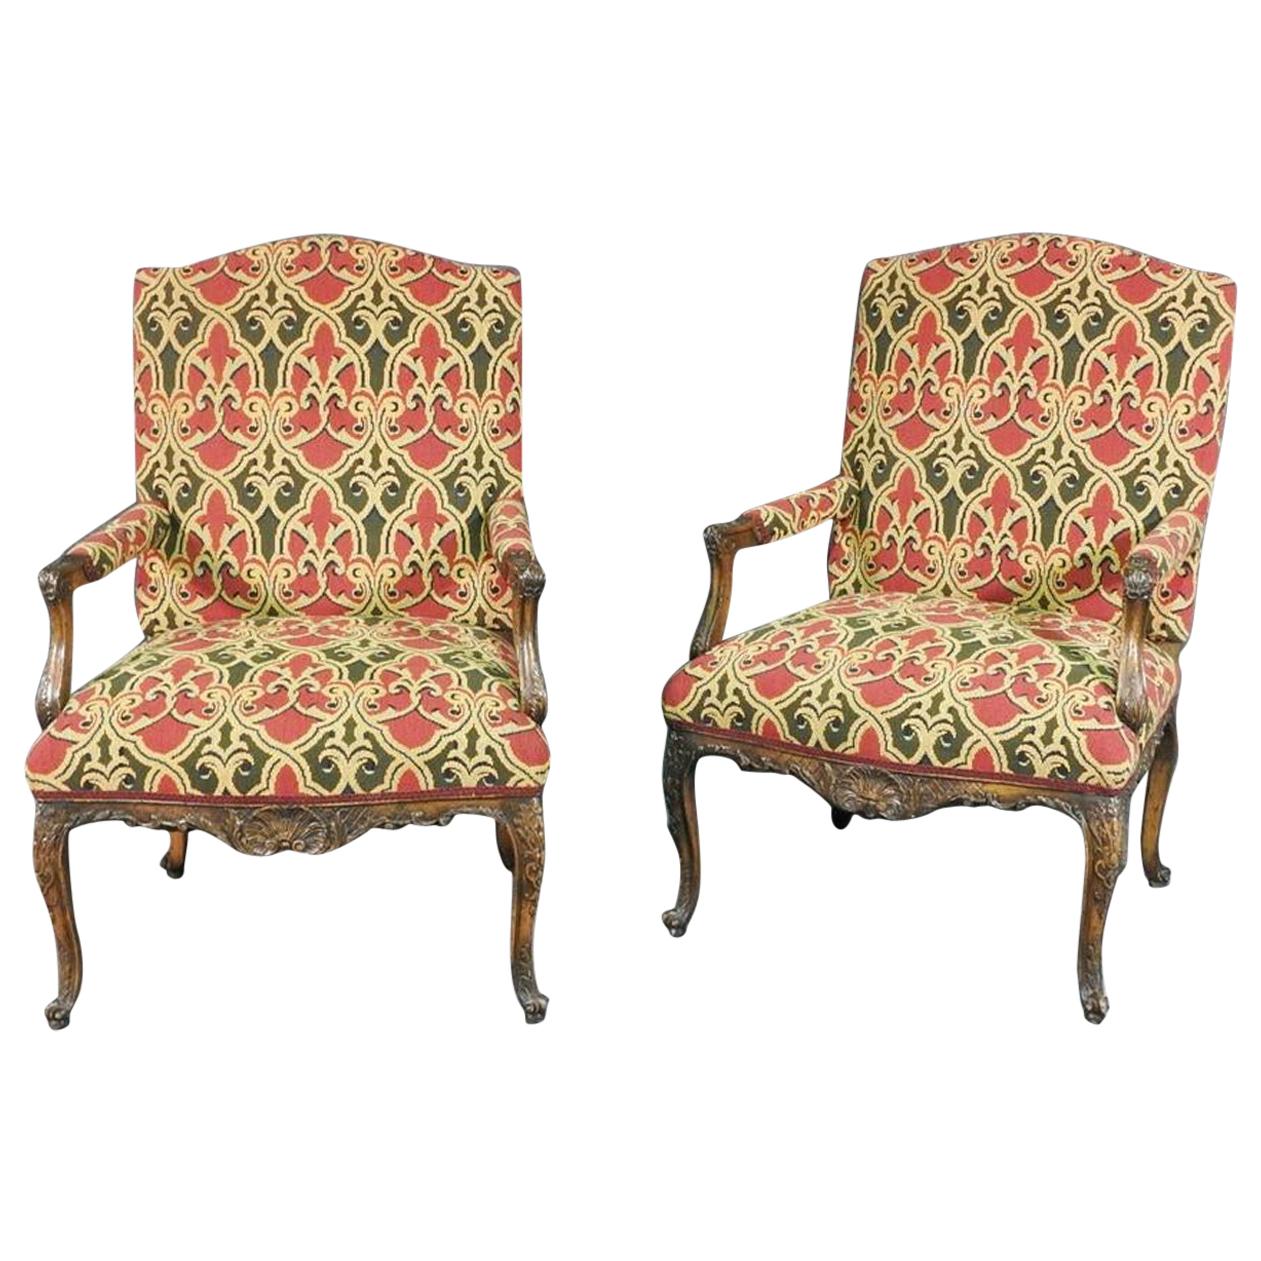 Pair of Carved Walnut French Louis XV Fauteuils Armchairs in Tapestry Upholstery